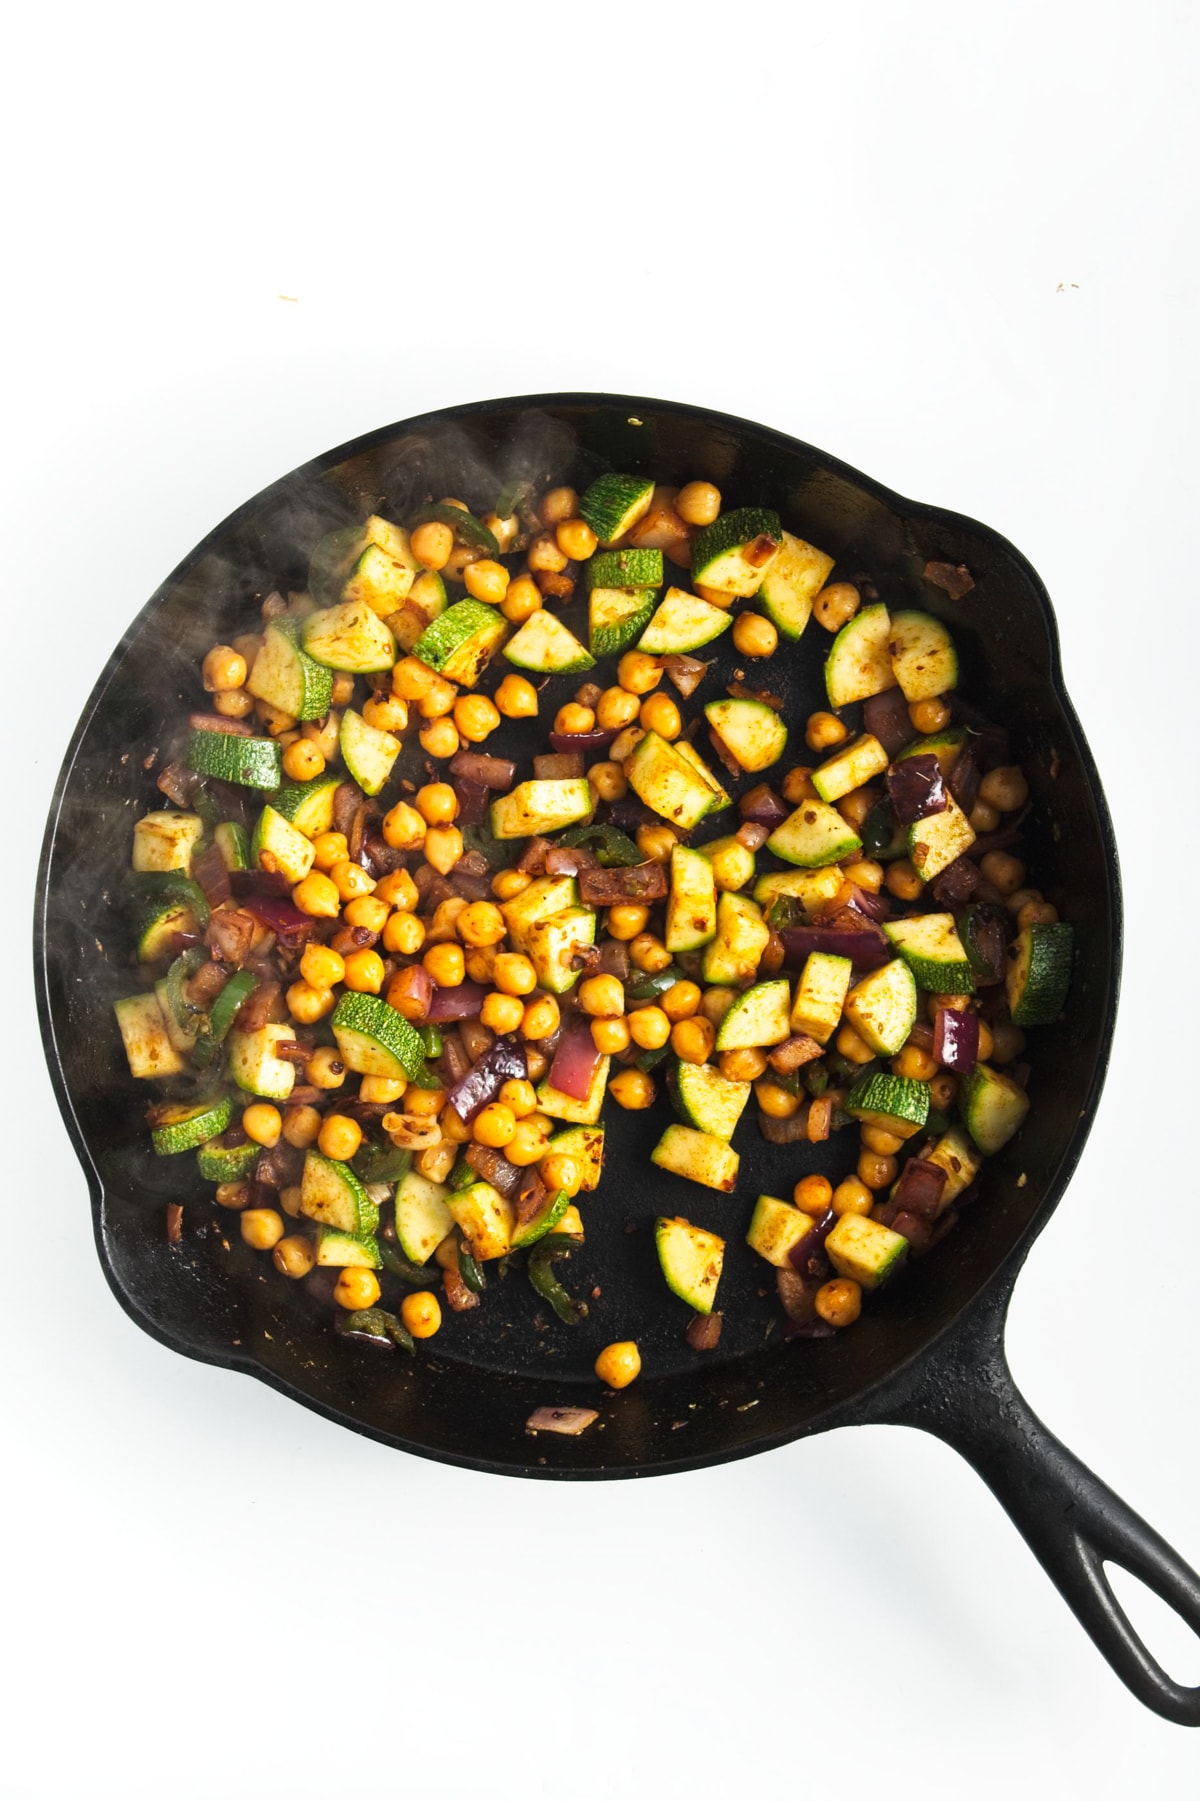 cooked veggies and chickpeas in a cast iron skillet